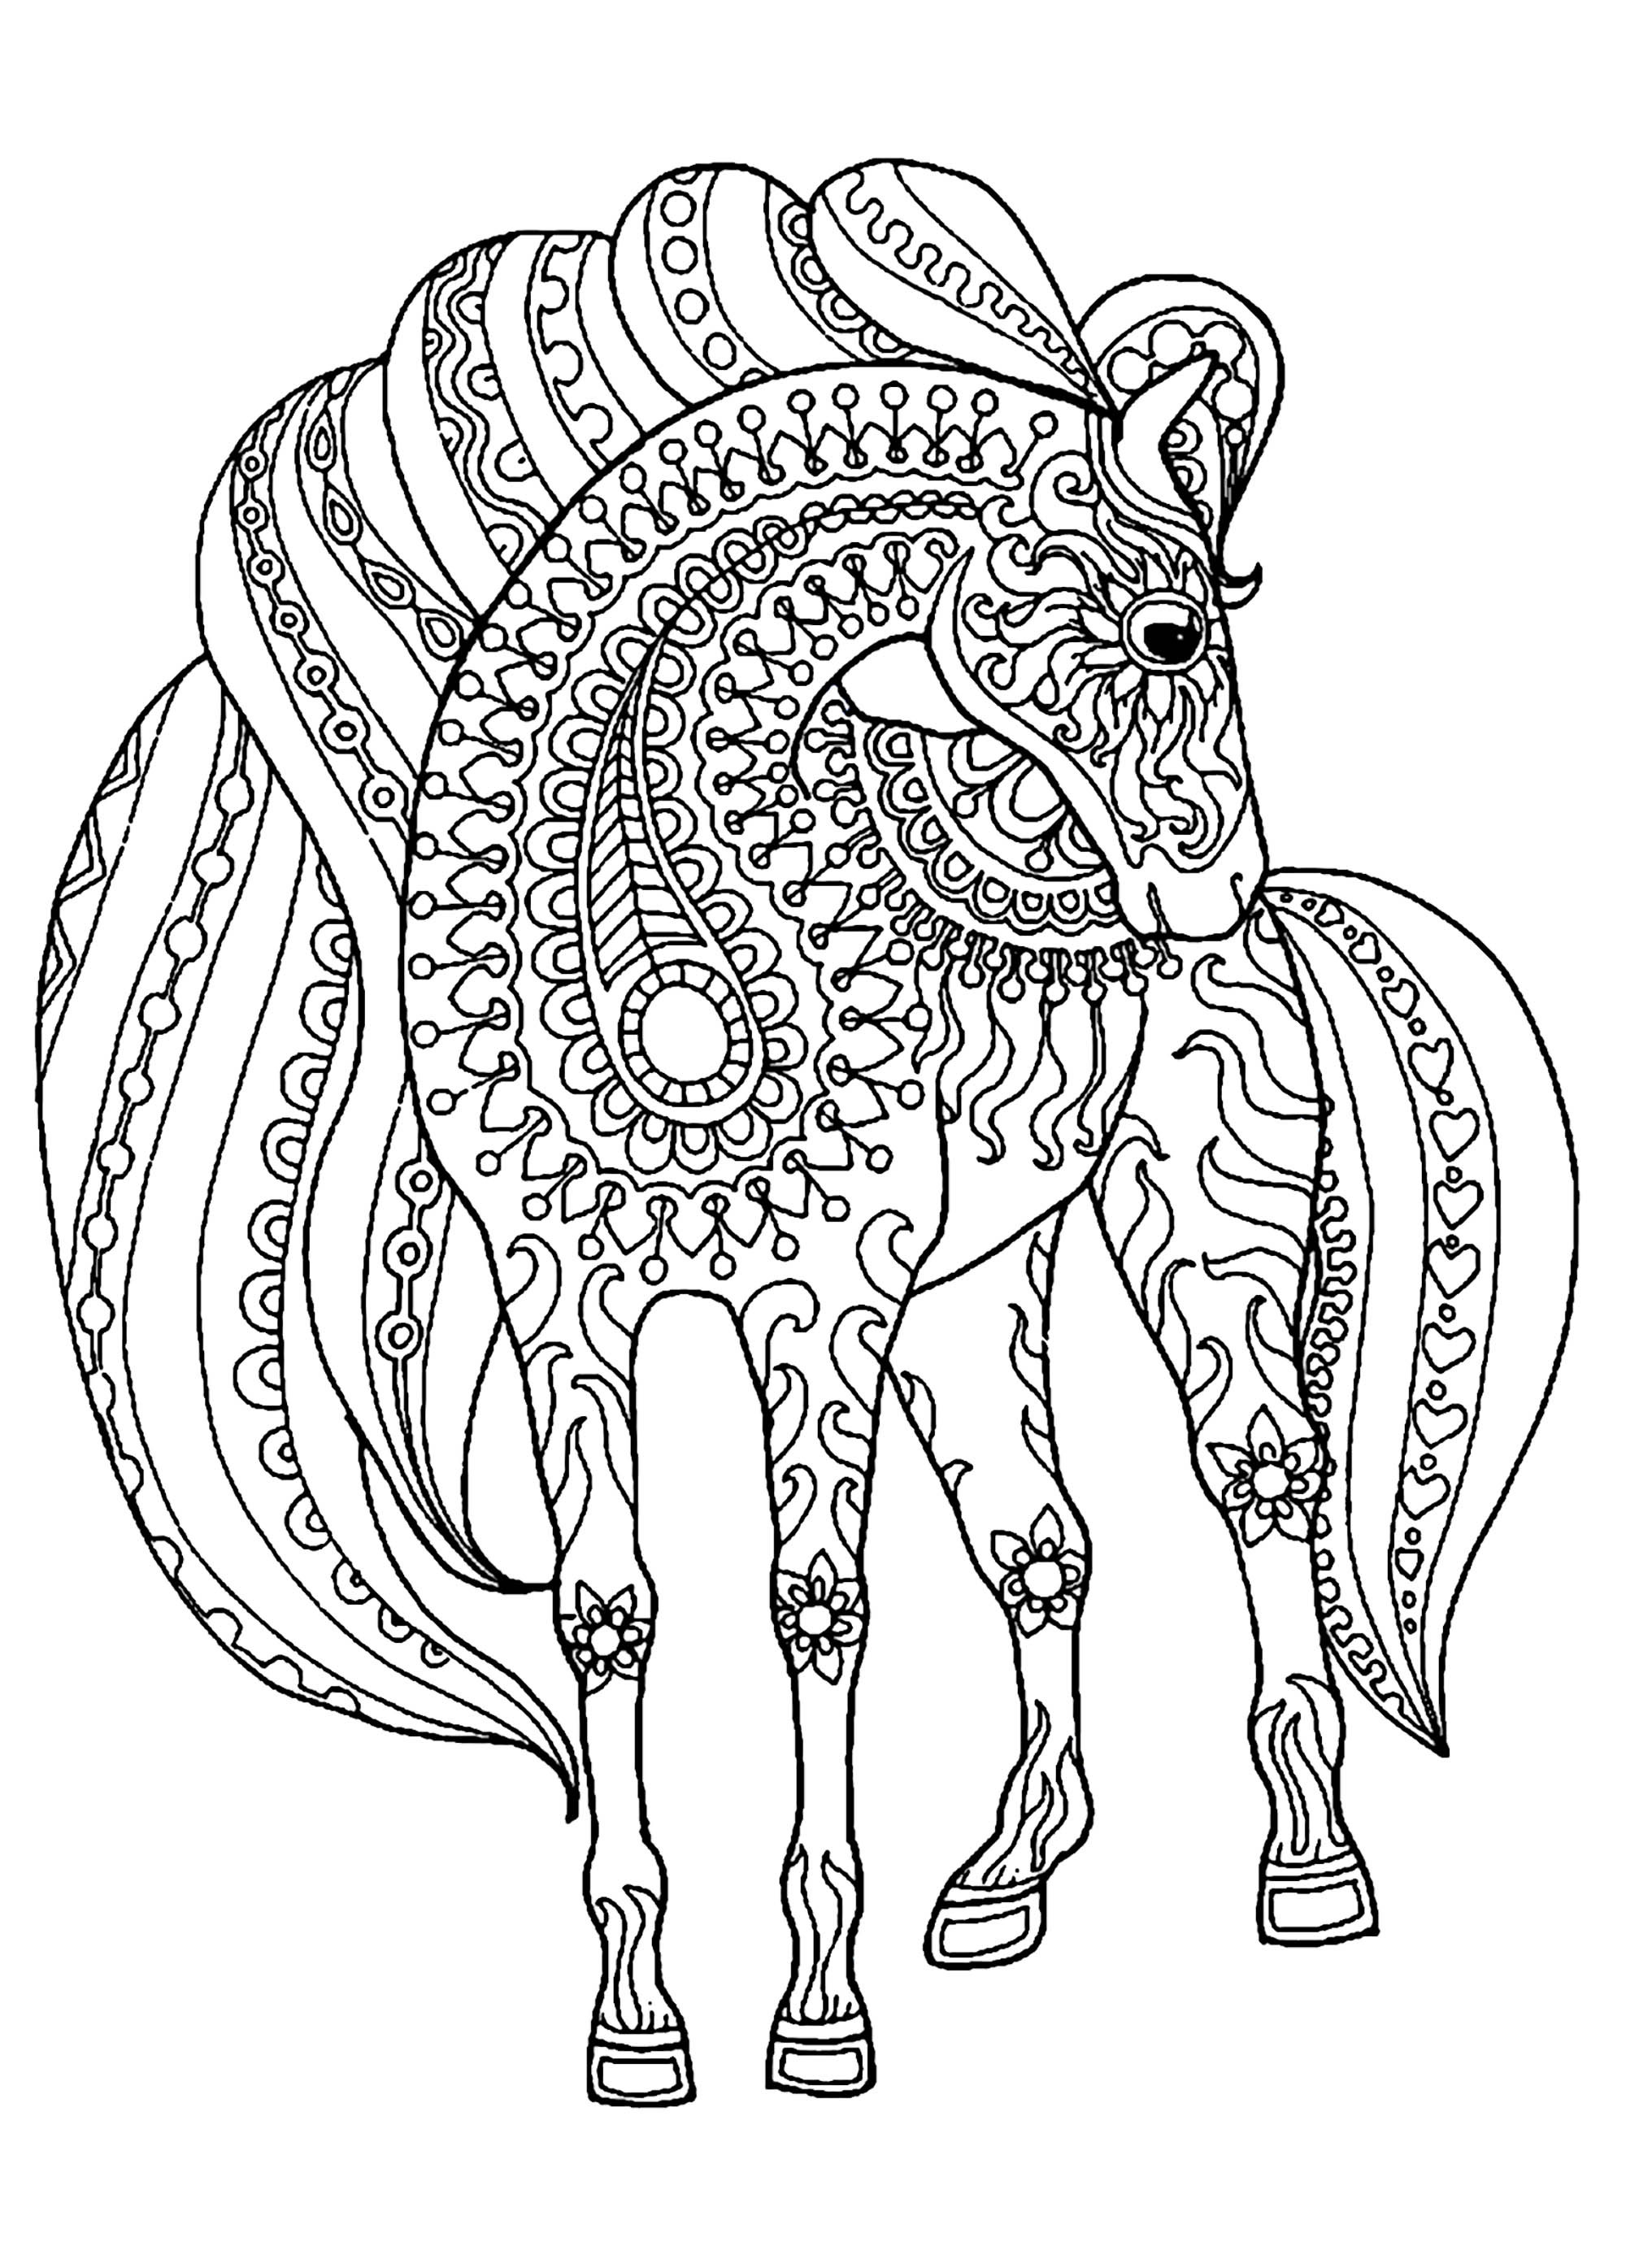 Horse Coloring Pages For Adults
 Horse simple zentangle patterns Horses Adult Coloring Pages